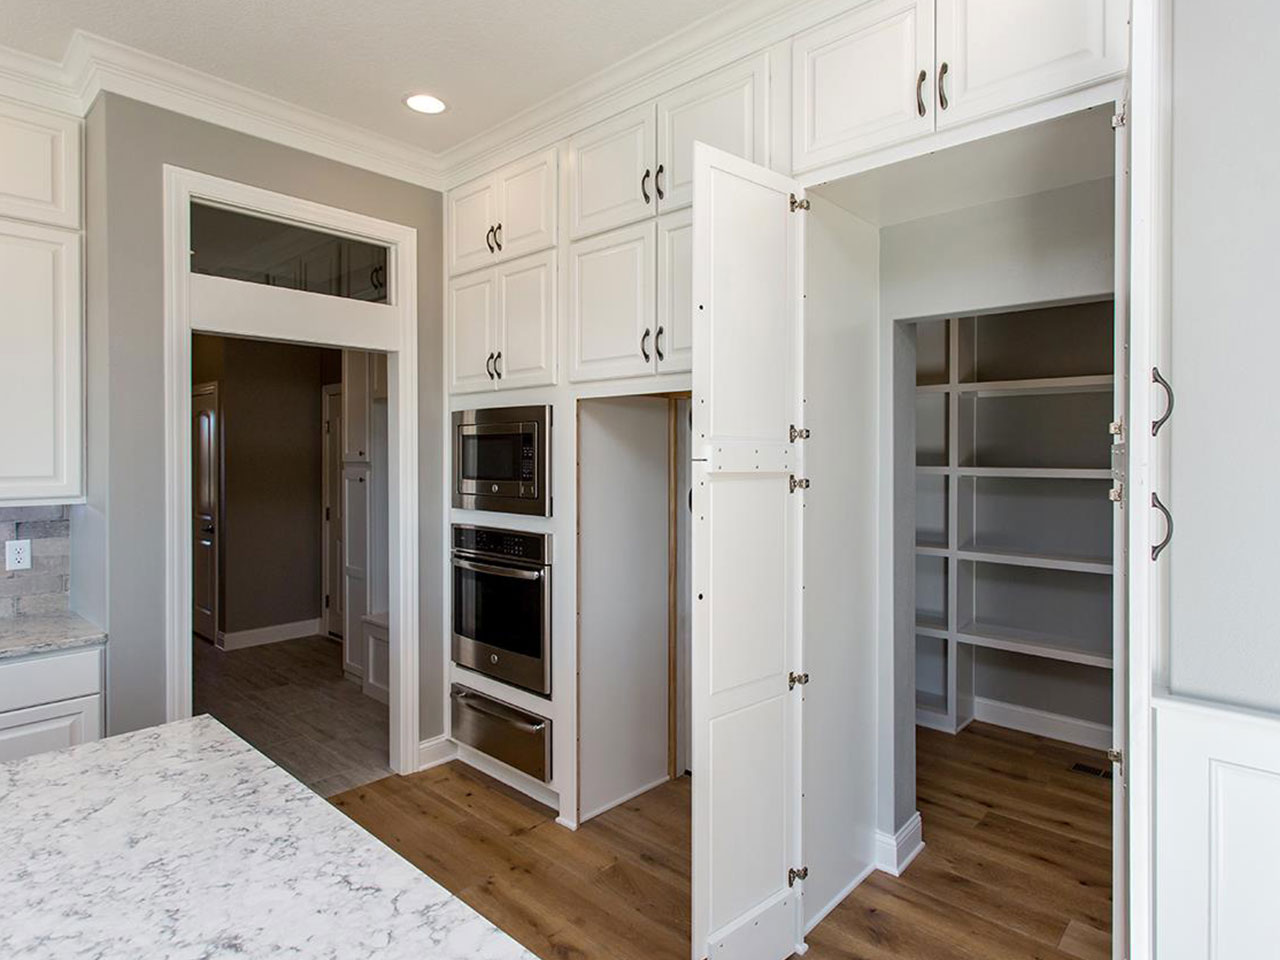 BMD Moehl Millwork SKS project kitchen cabinets and walk-in pantry